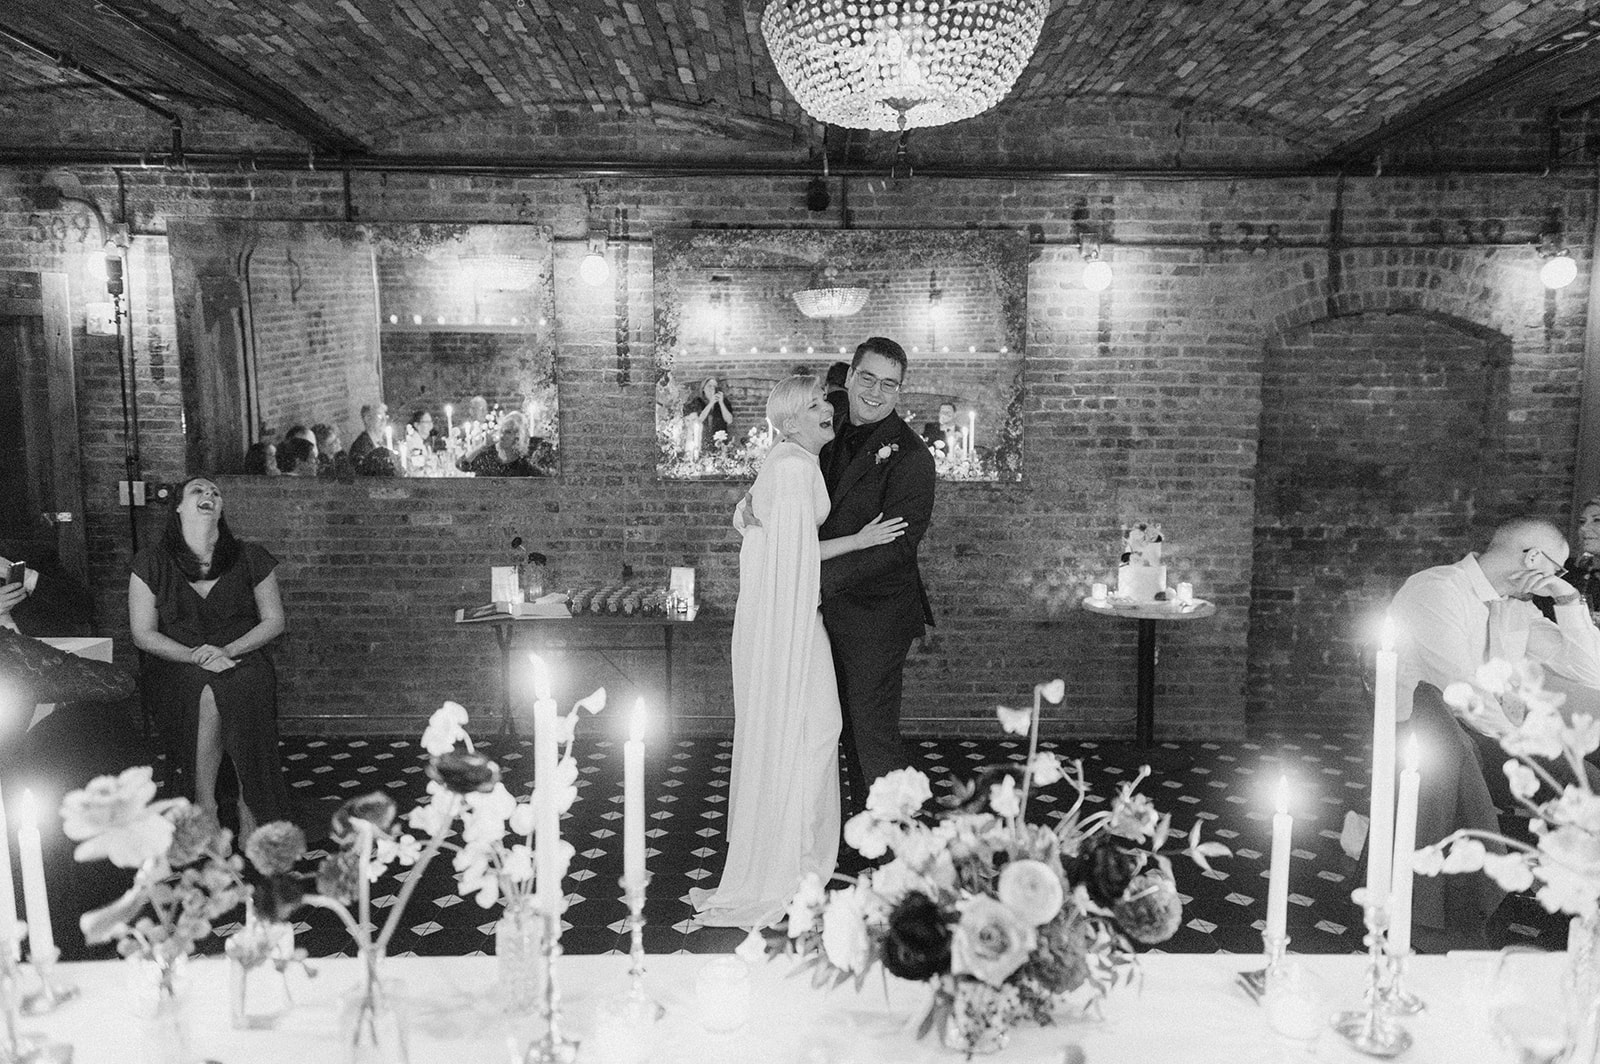 Classic black and white wedding photography in New York City